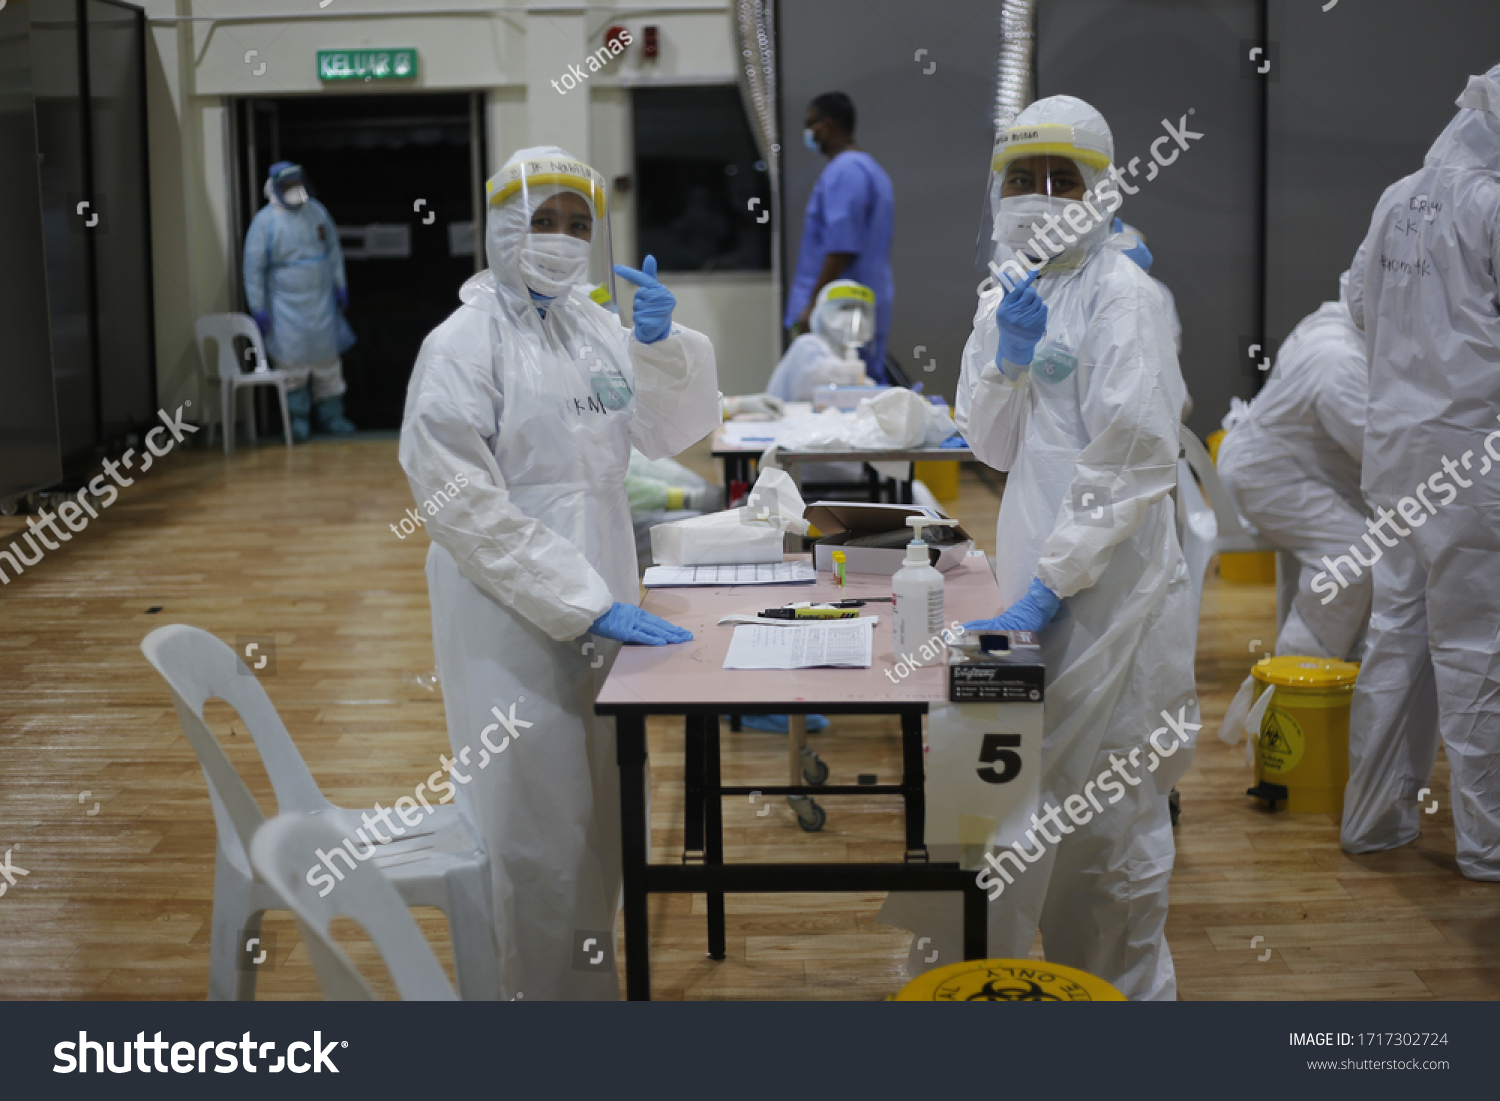 KLIA, Malaysia - April 28, 2020: Health screening from Melaysia Ministry of Health for passengers from Indonesia to Malaysia to prevent covid-19 spread. #1717302724